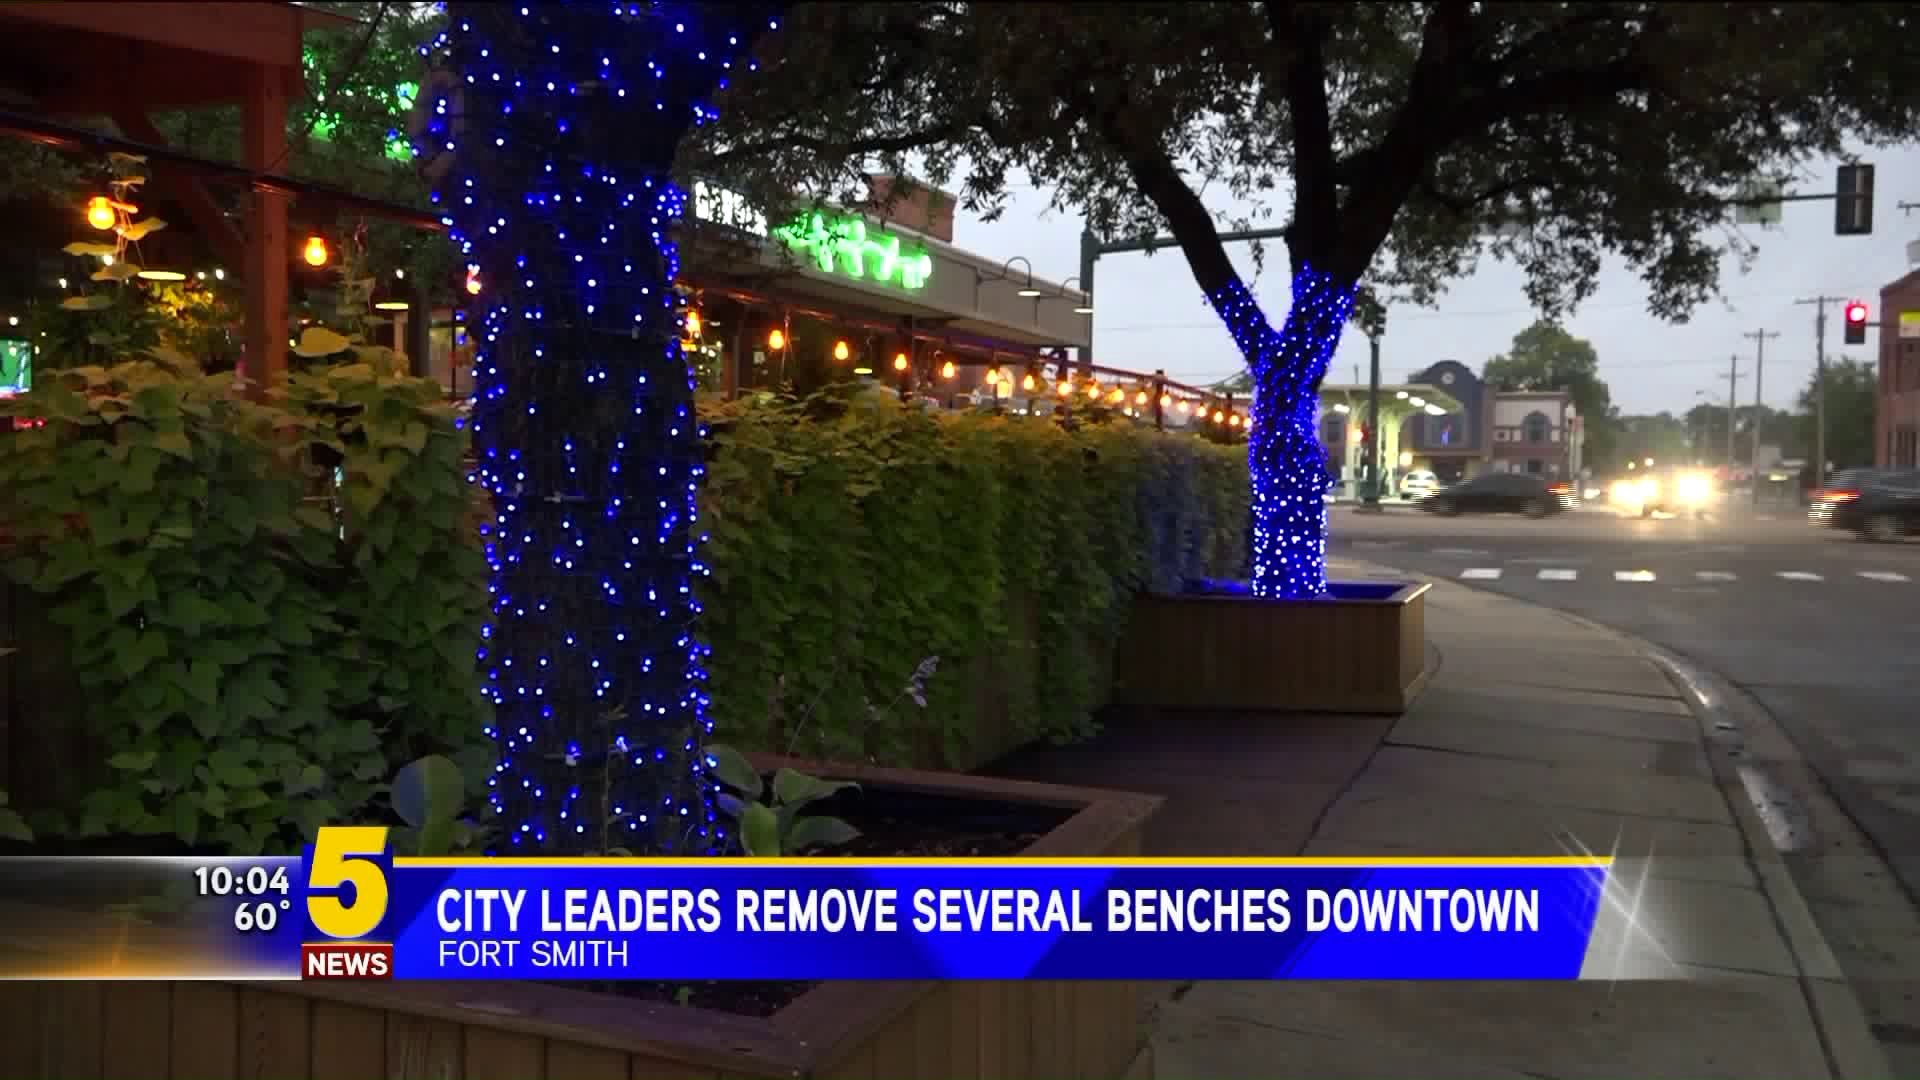 City Leaders Remove Several Benches Downtown